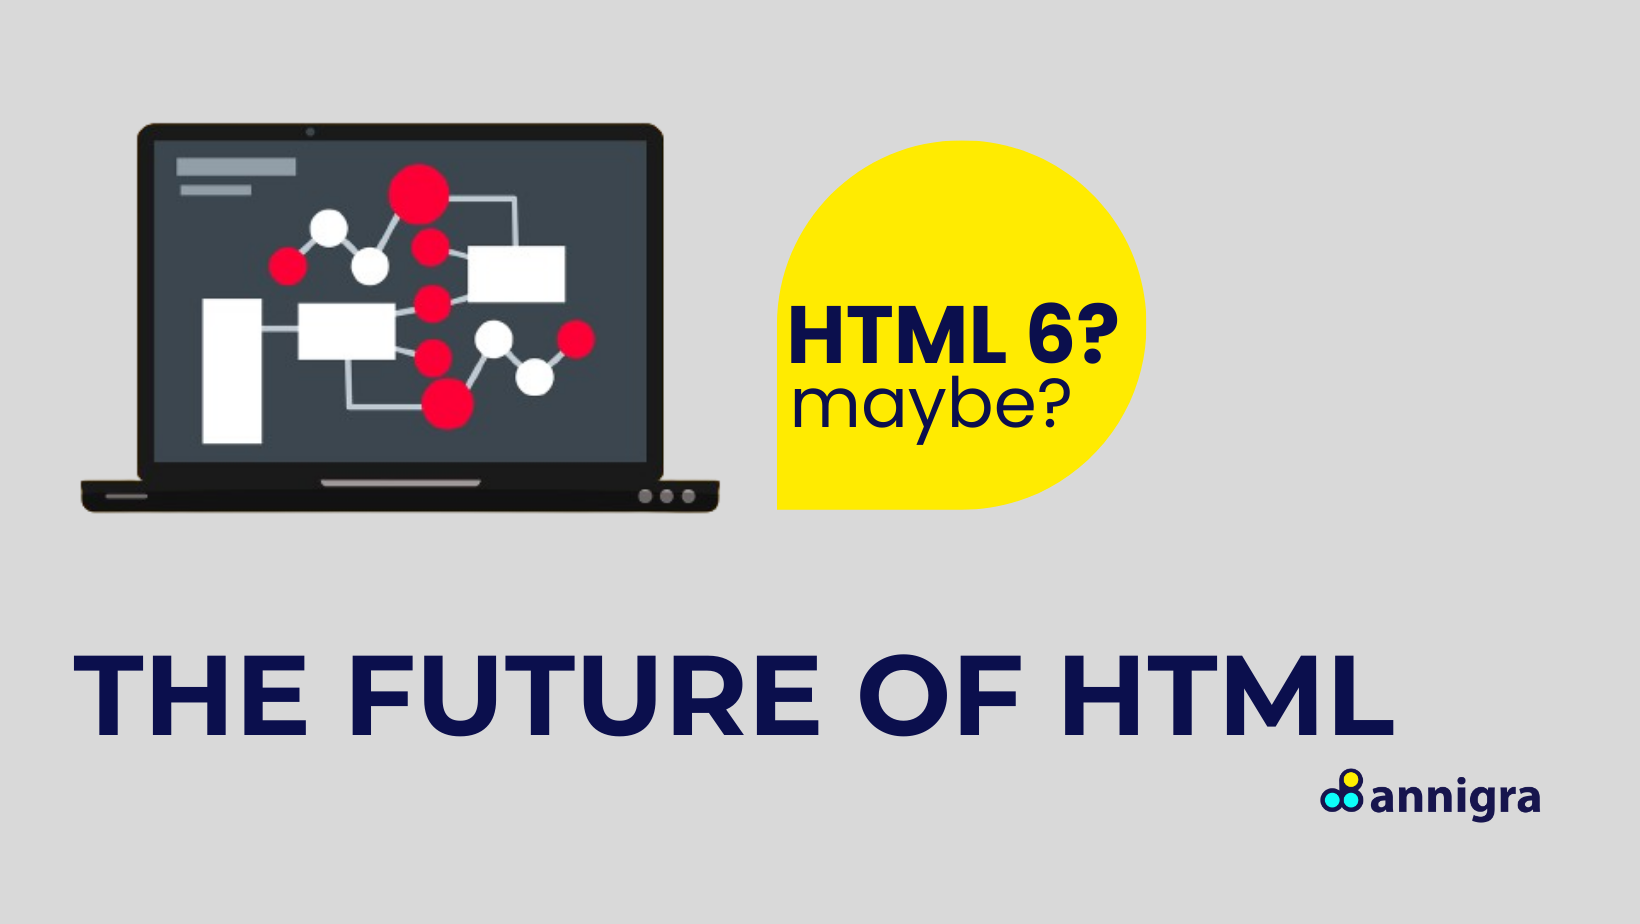 the future of html